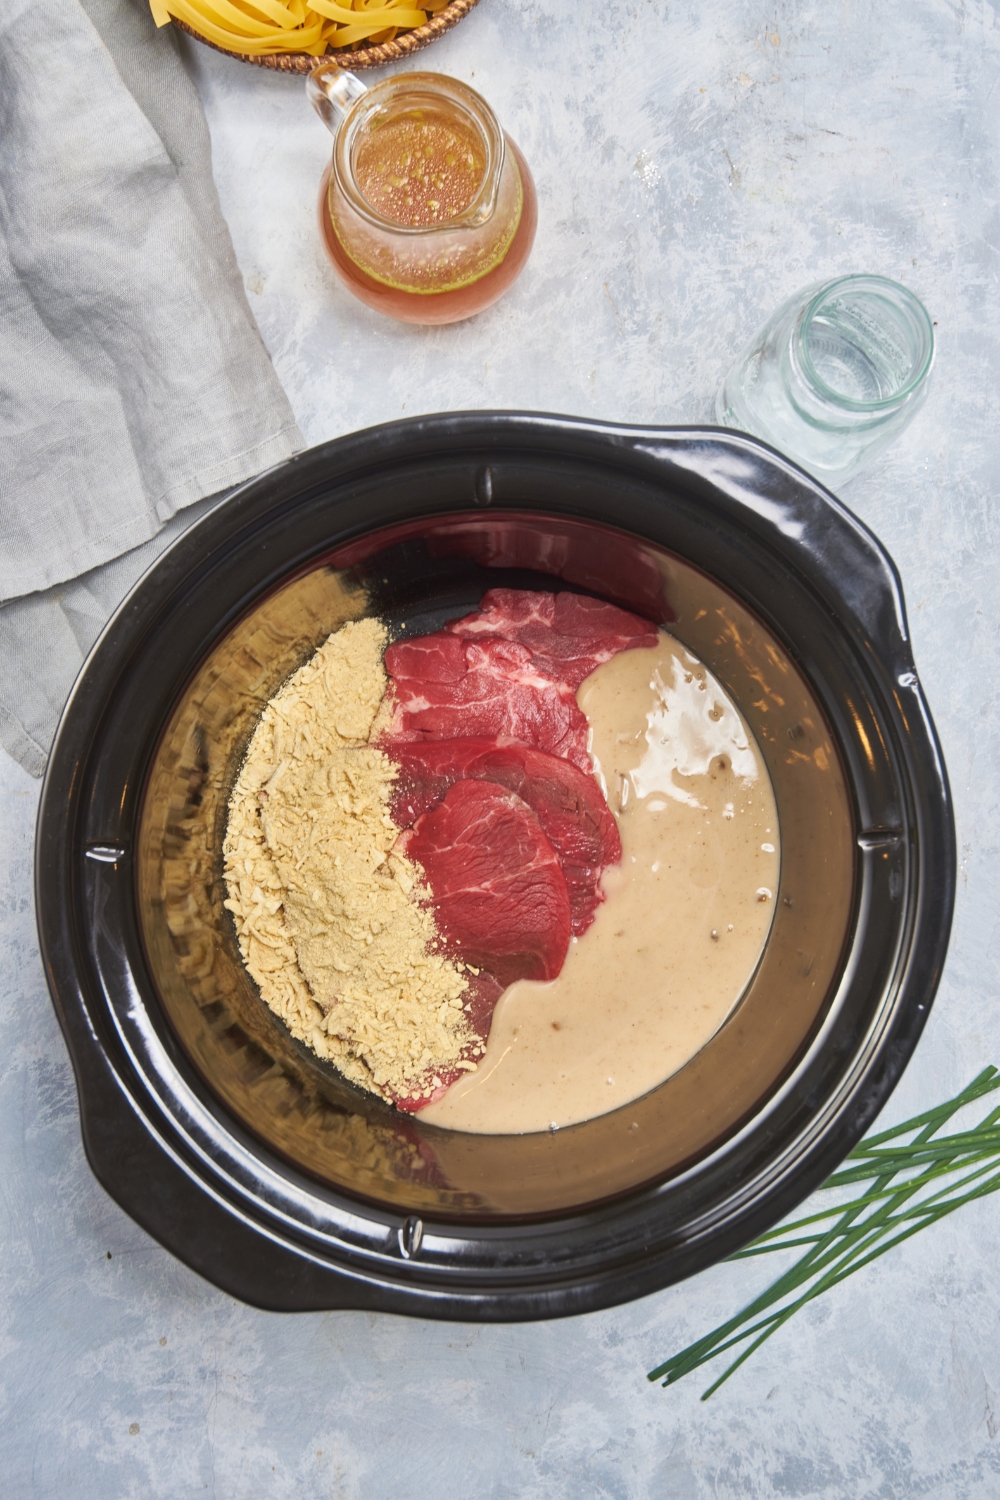 Black crockpot filled with raw cube steak, creamy soup, and a dry soup mix. The ingredients have not been mixed together.